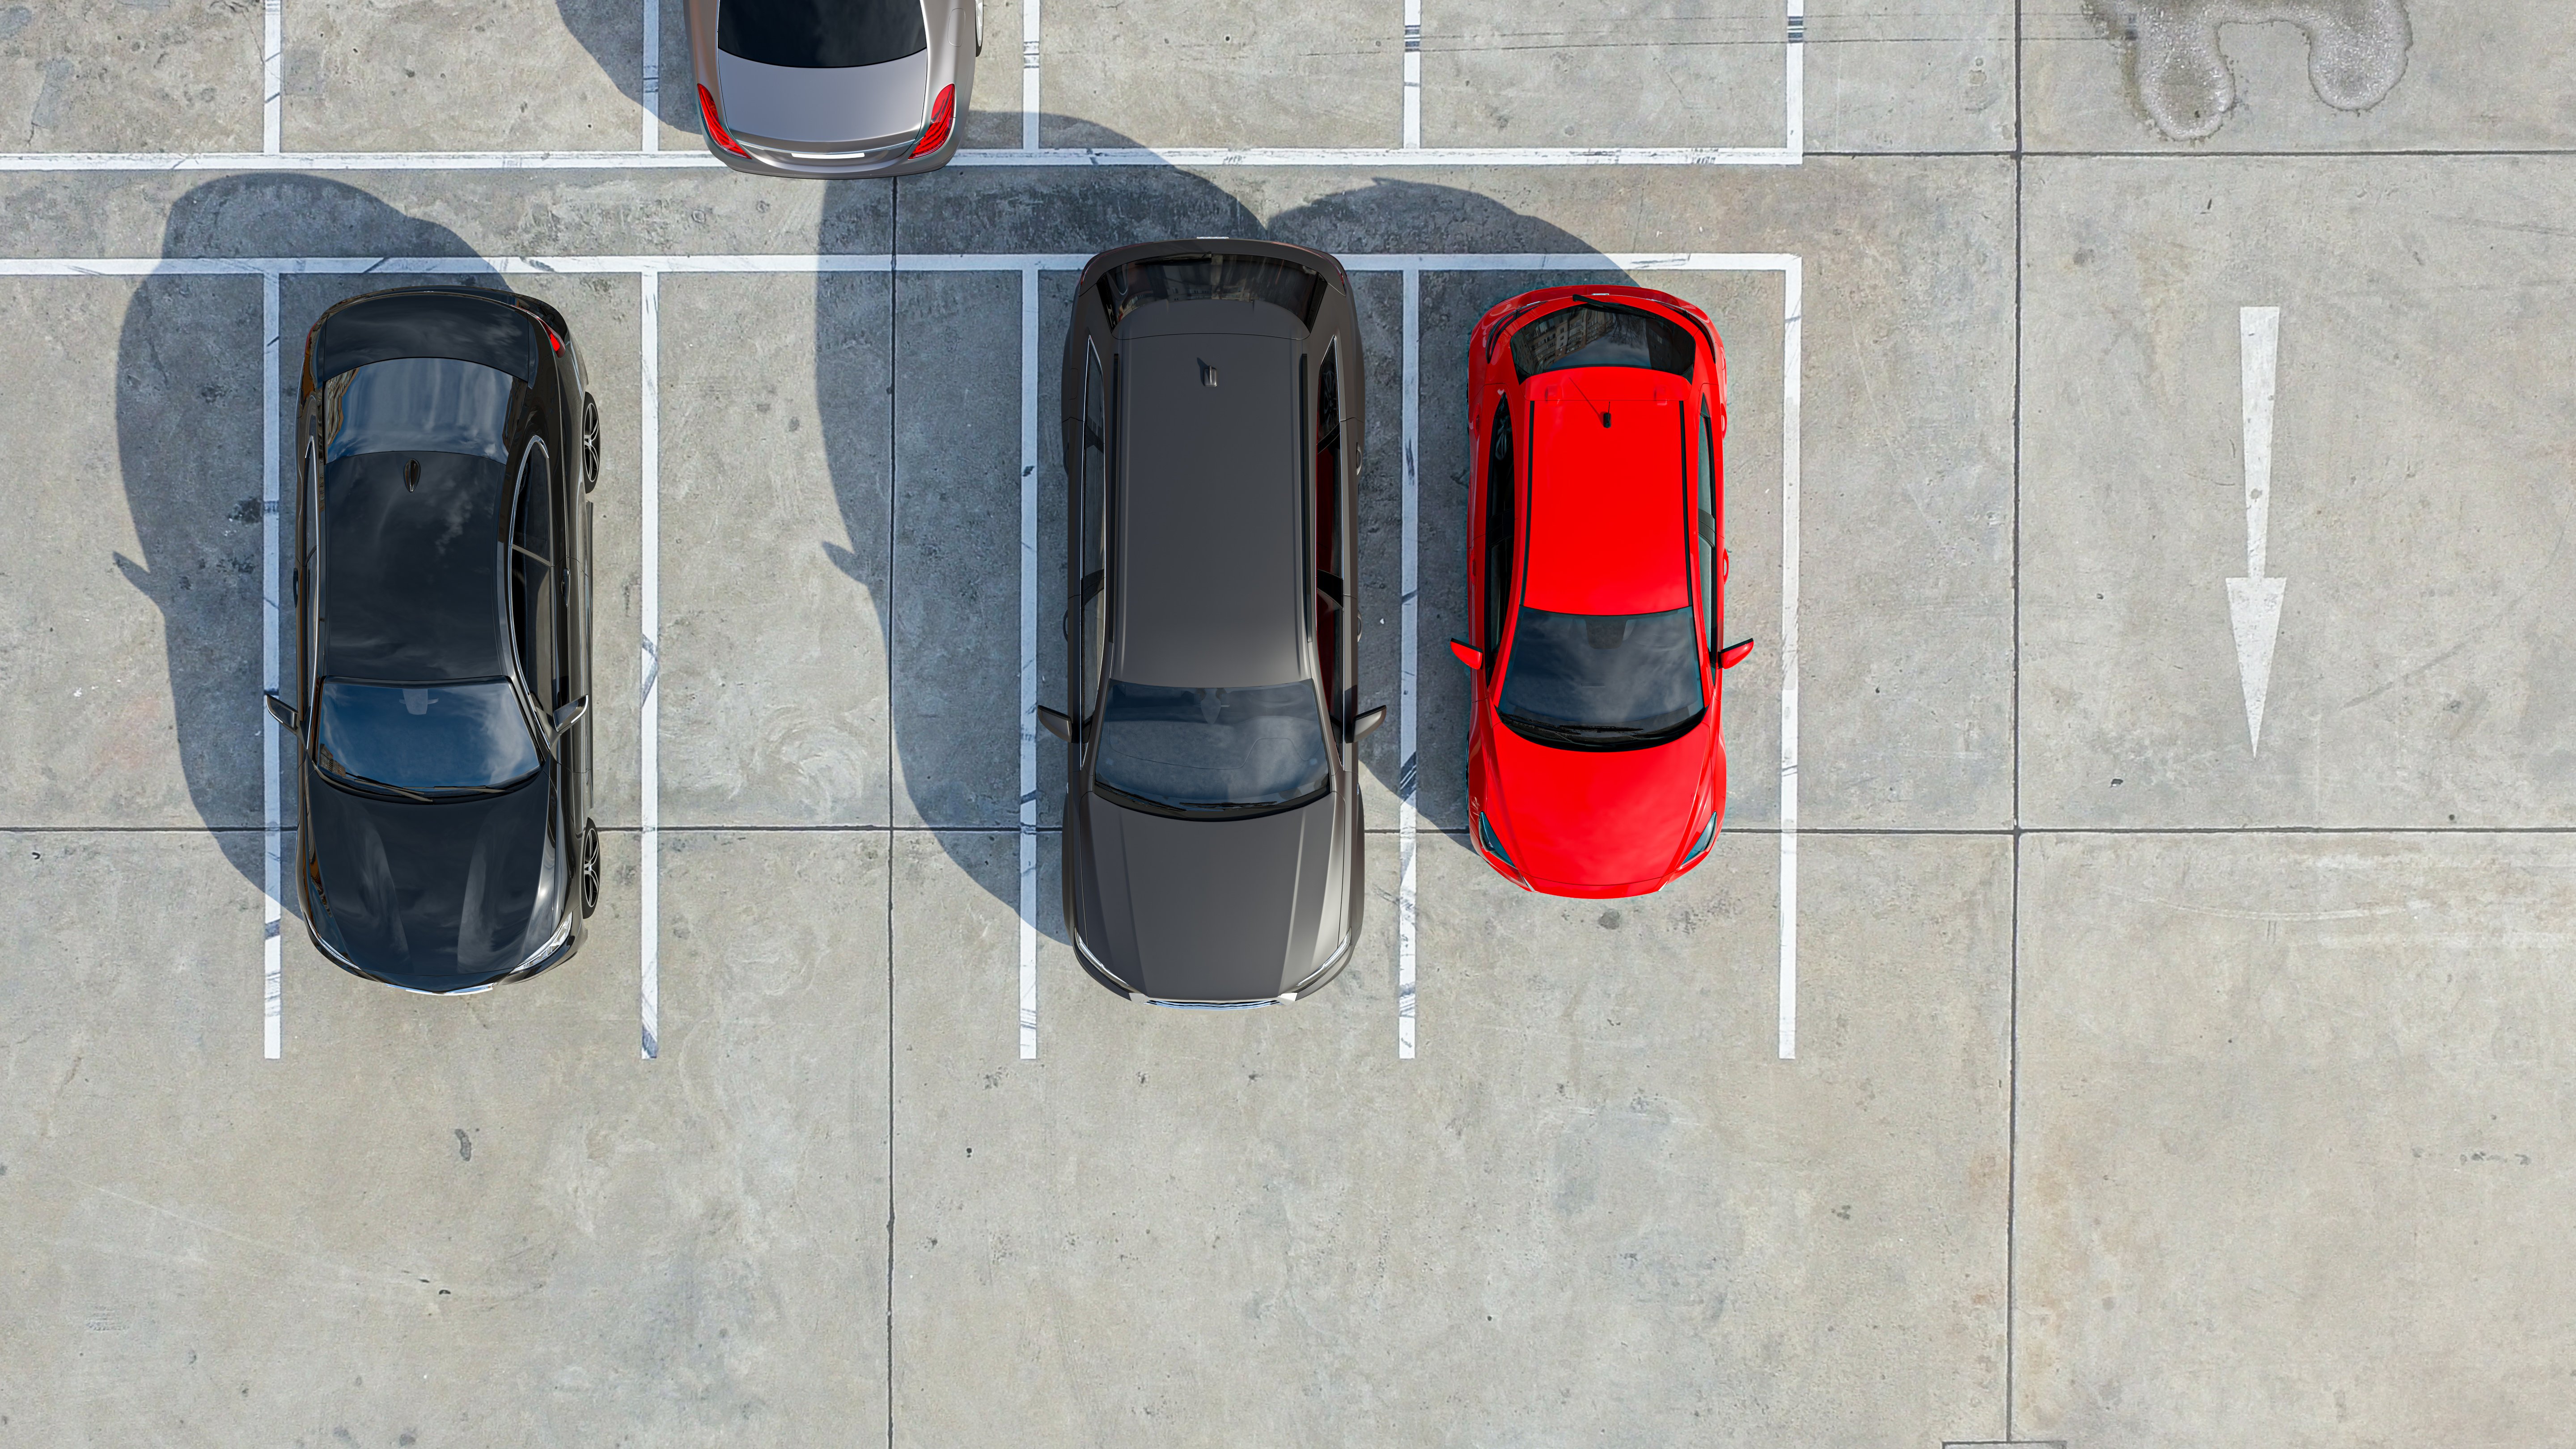 Cars in parking lot